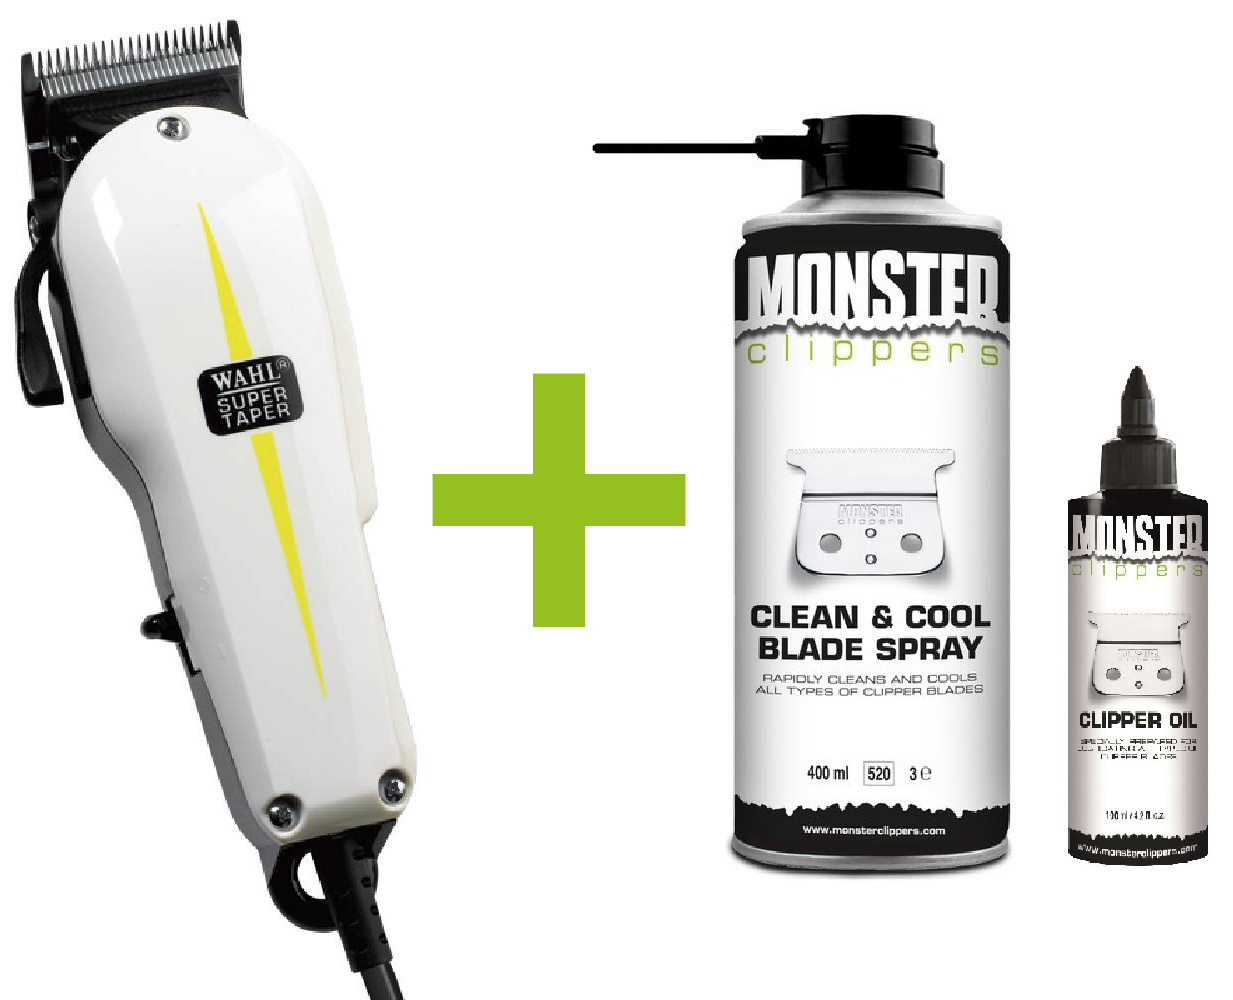 lint Marco Polo Bevestiging Wahl Super Taper Tondeuse + Monster Clippers Clean & Cool Blade Spray & Olie  - kapperssale